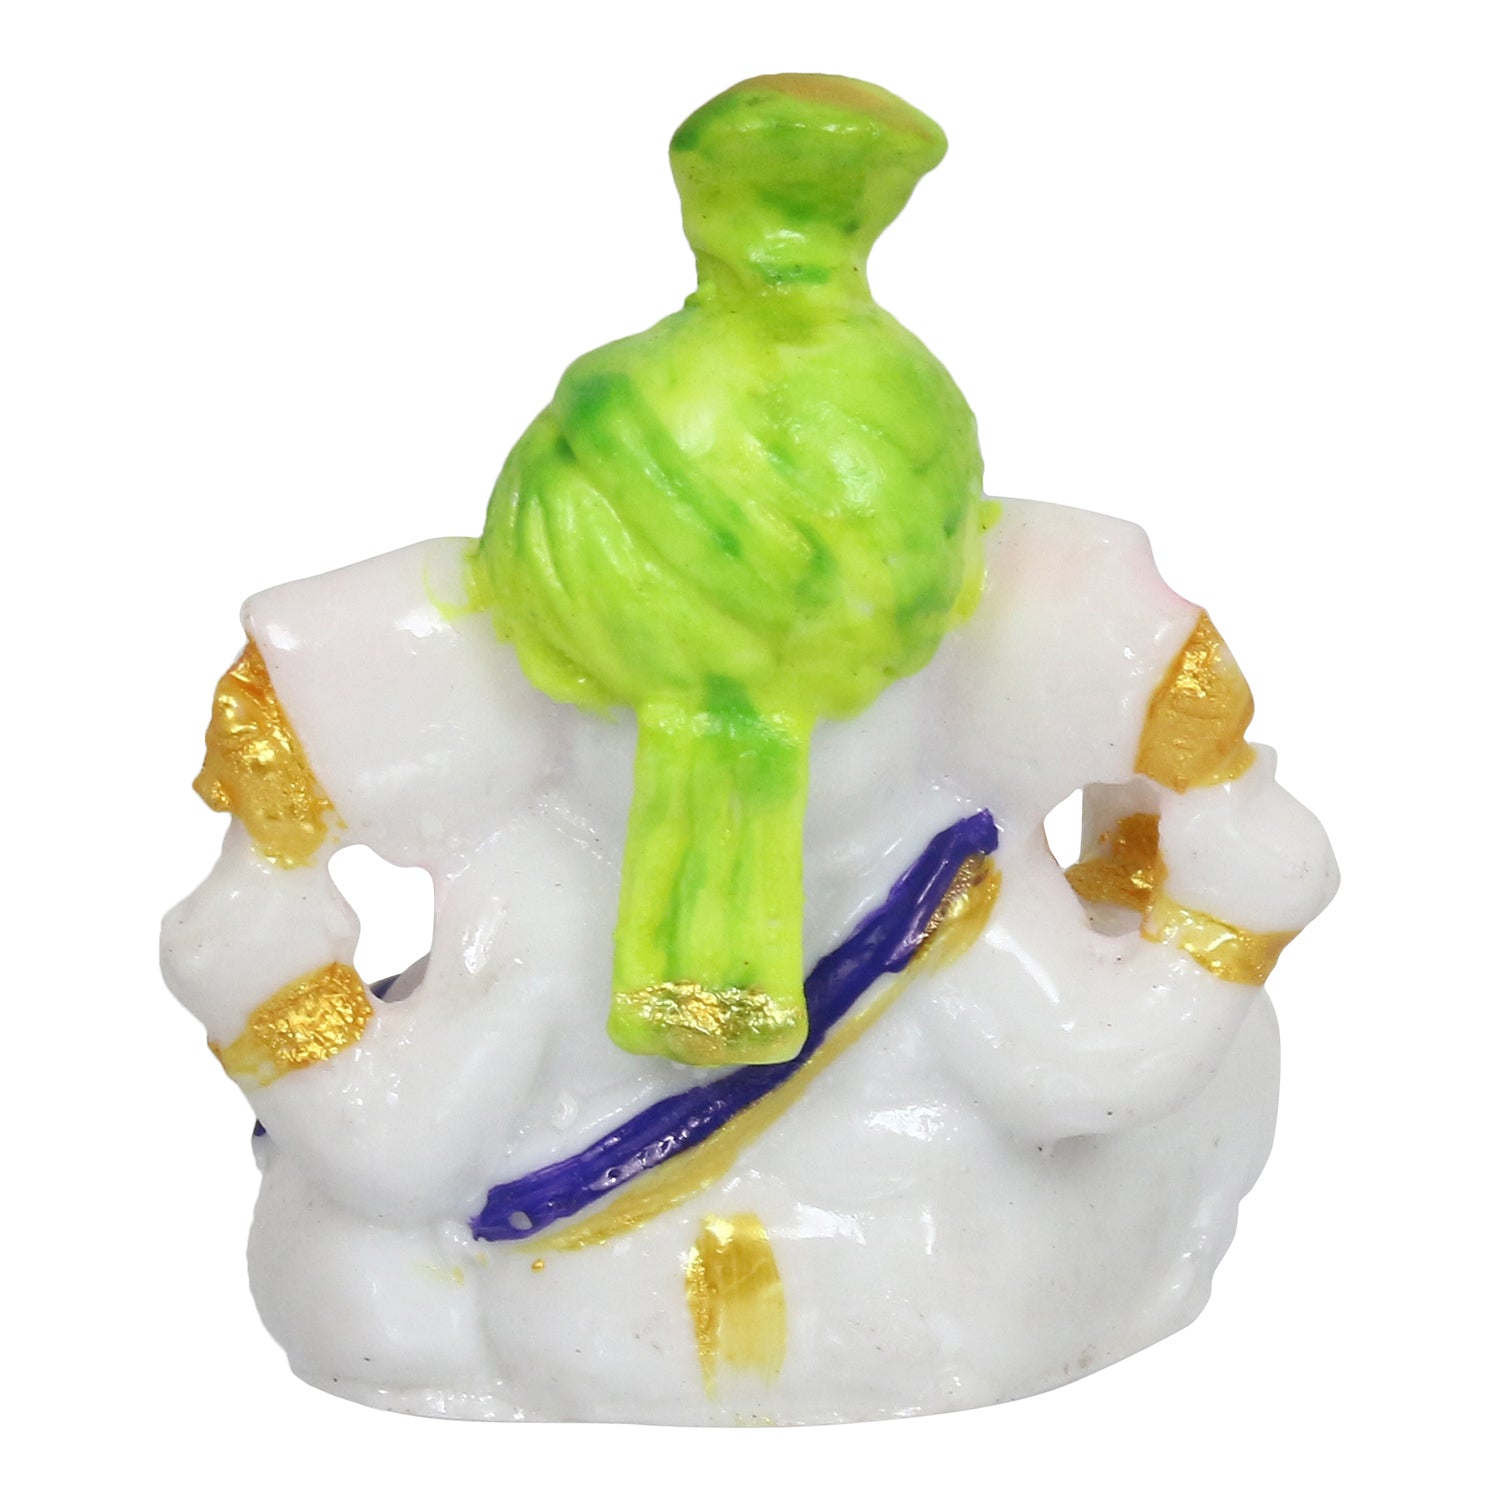 Decorative Lord Ganesha Idol For Car Dashboard, Home Temple, And Office Desks 6